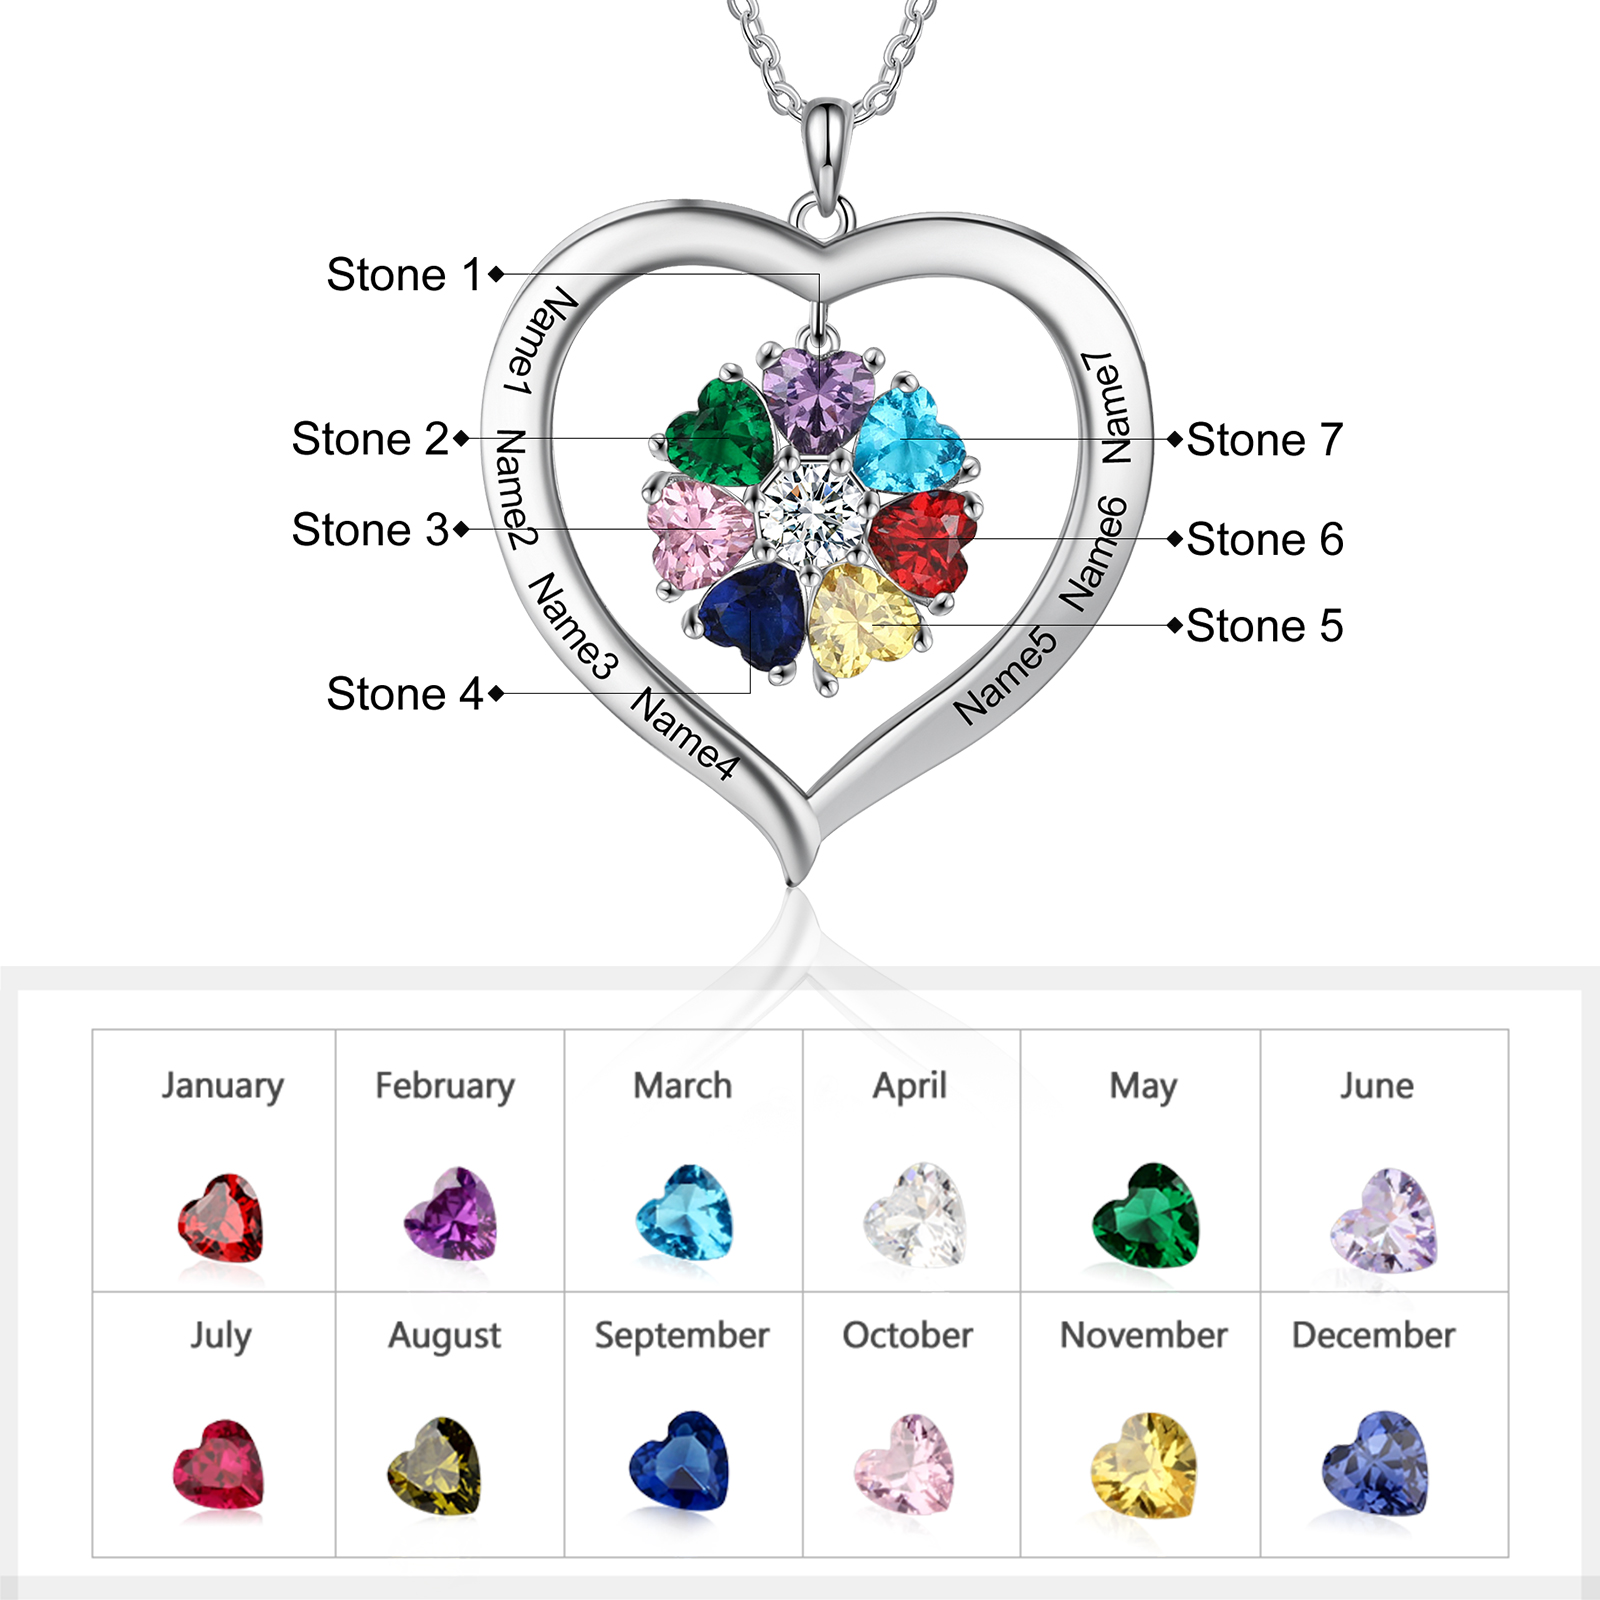 Personalized Heart Pendant Necklace with 7 Birthstones Family Necklace